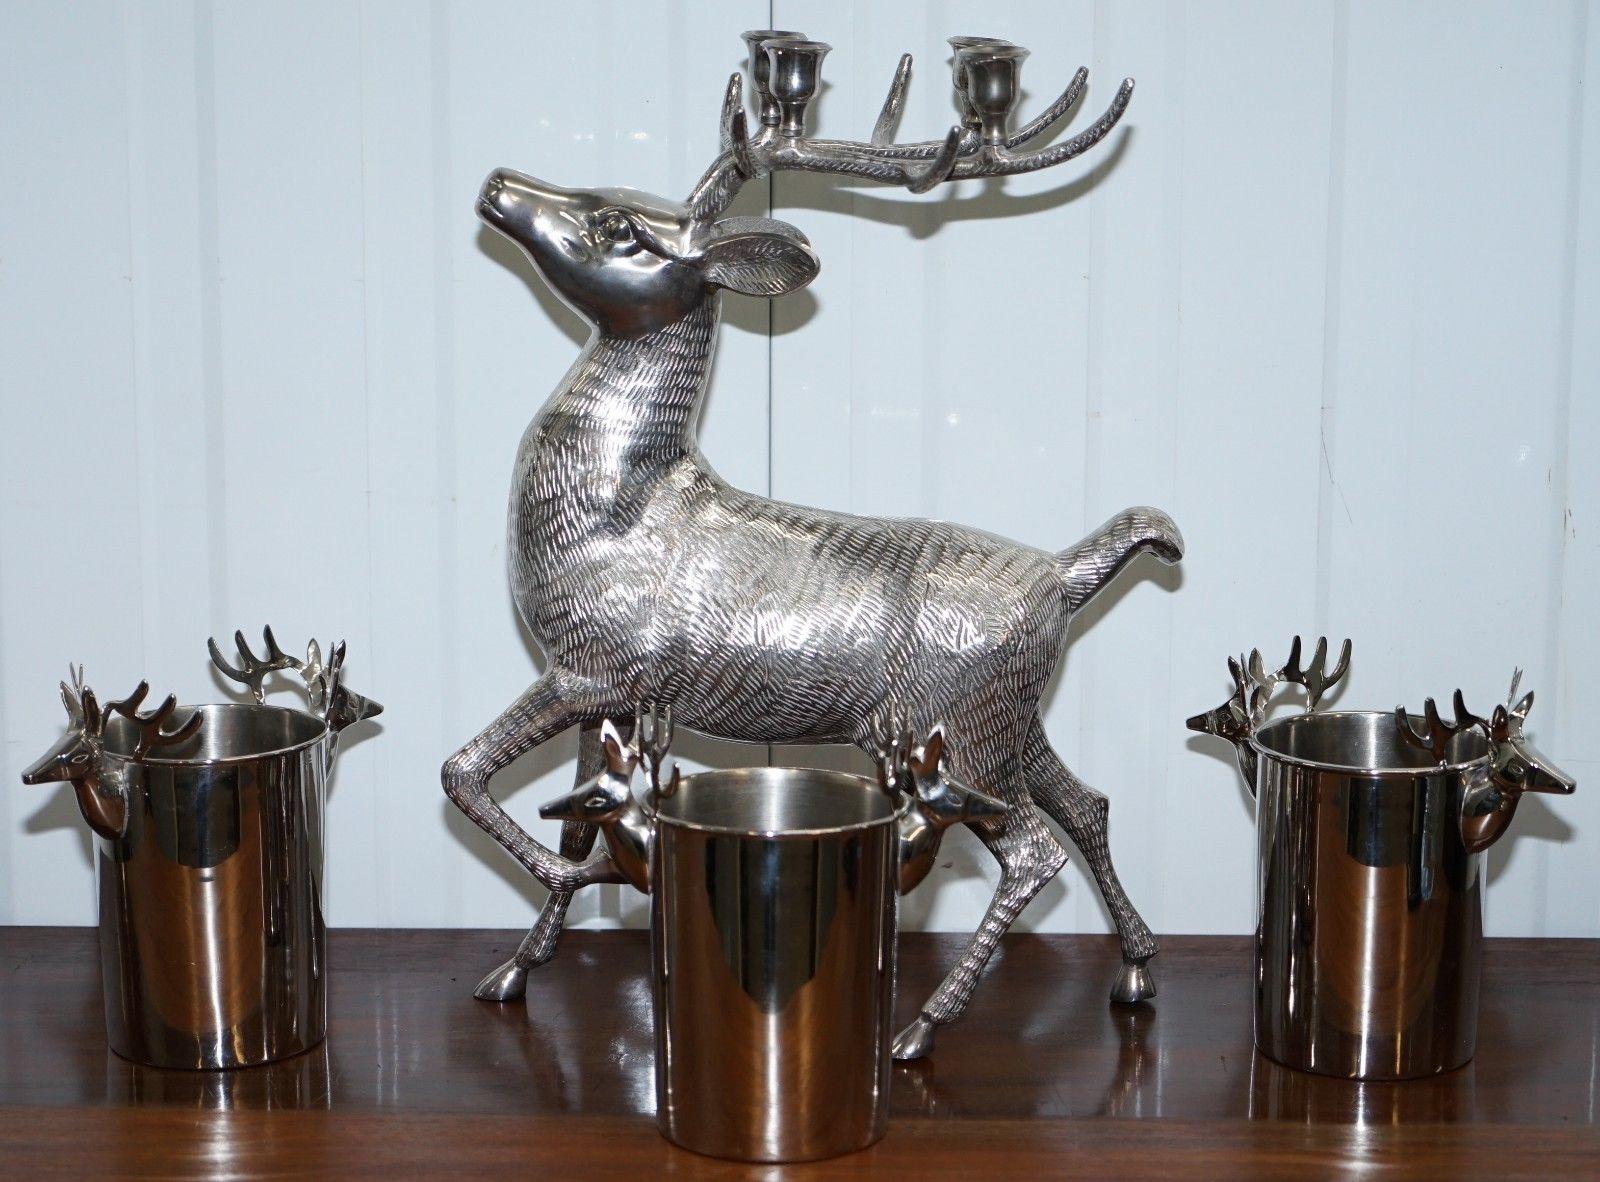 We are delighted to offer for sale this very nicely cast silver plated candle stick holder centre piece of a Reindeer

I’ve seen allot of basic versions of these over the years but never one as fine as this, the detail is exquisite as is the